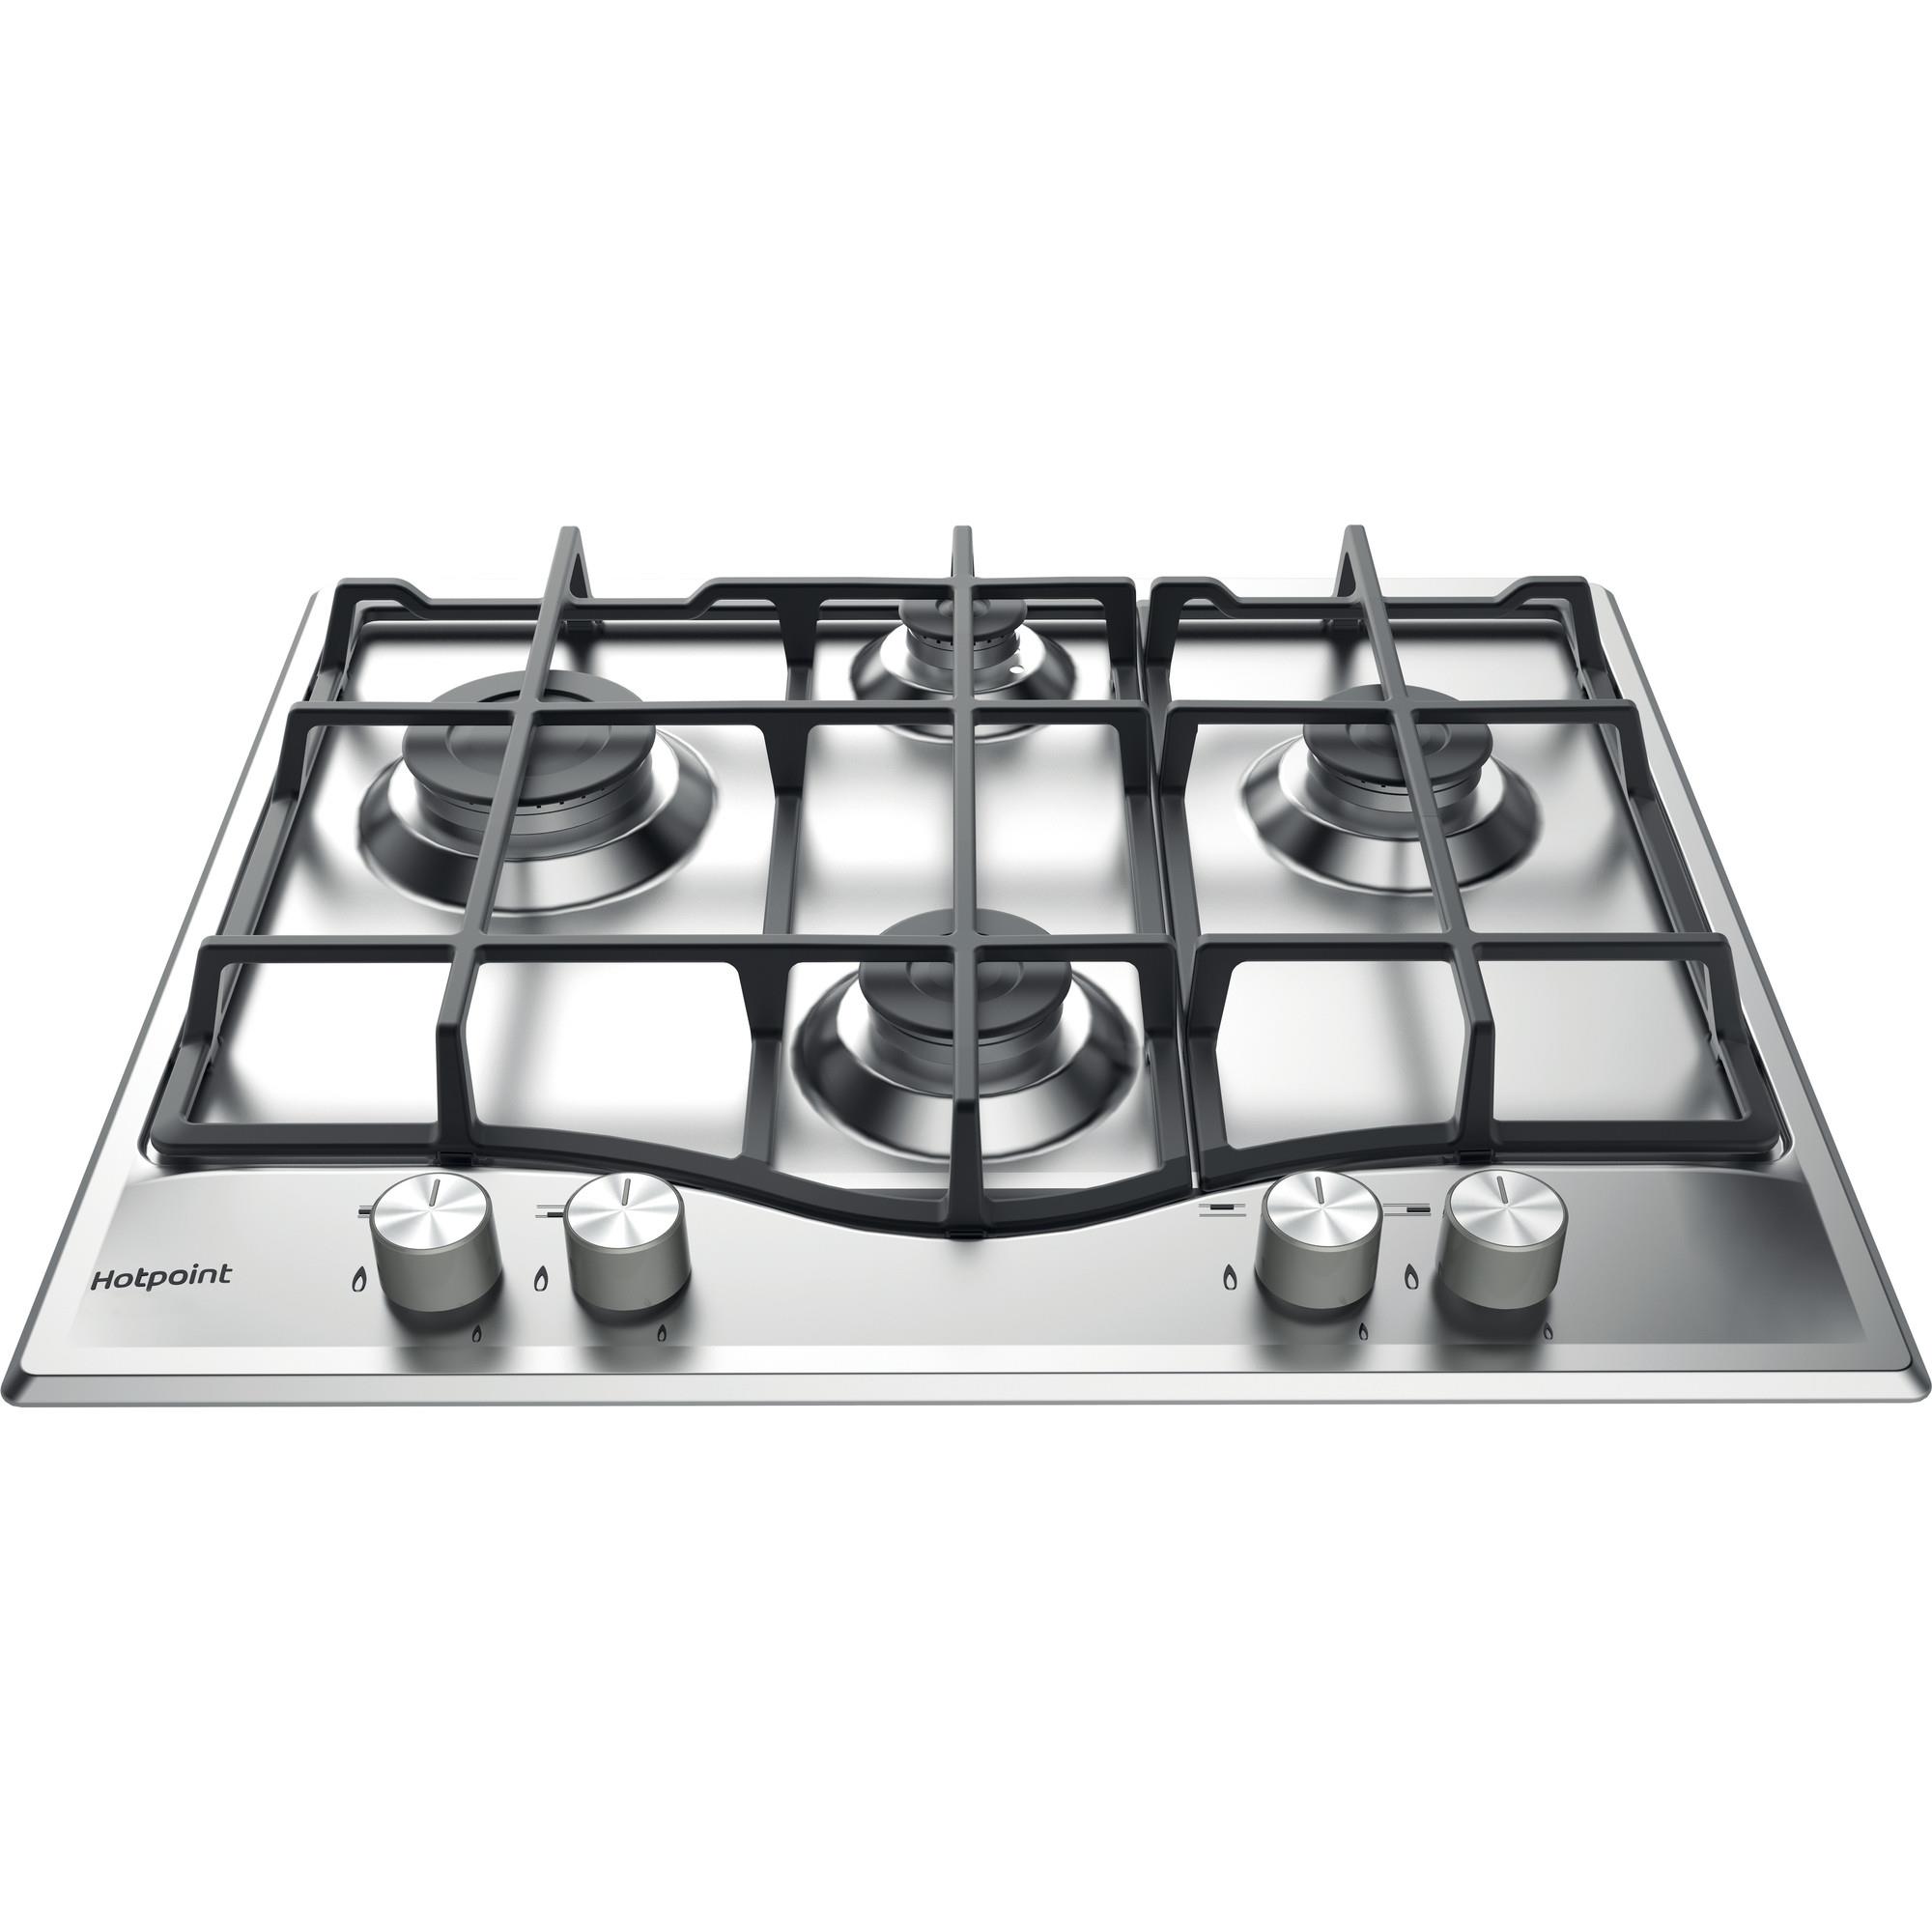 Hotpoint Ultima PCN 641 IX/H Hob - Stainless Steel